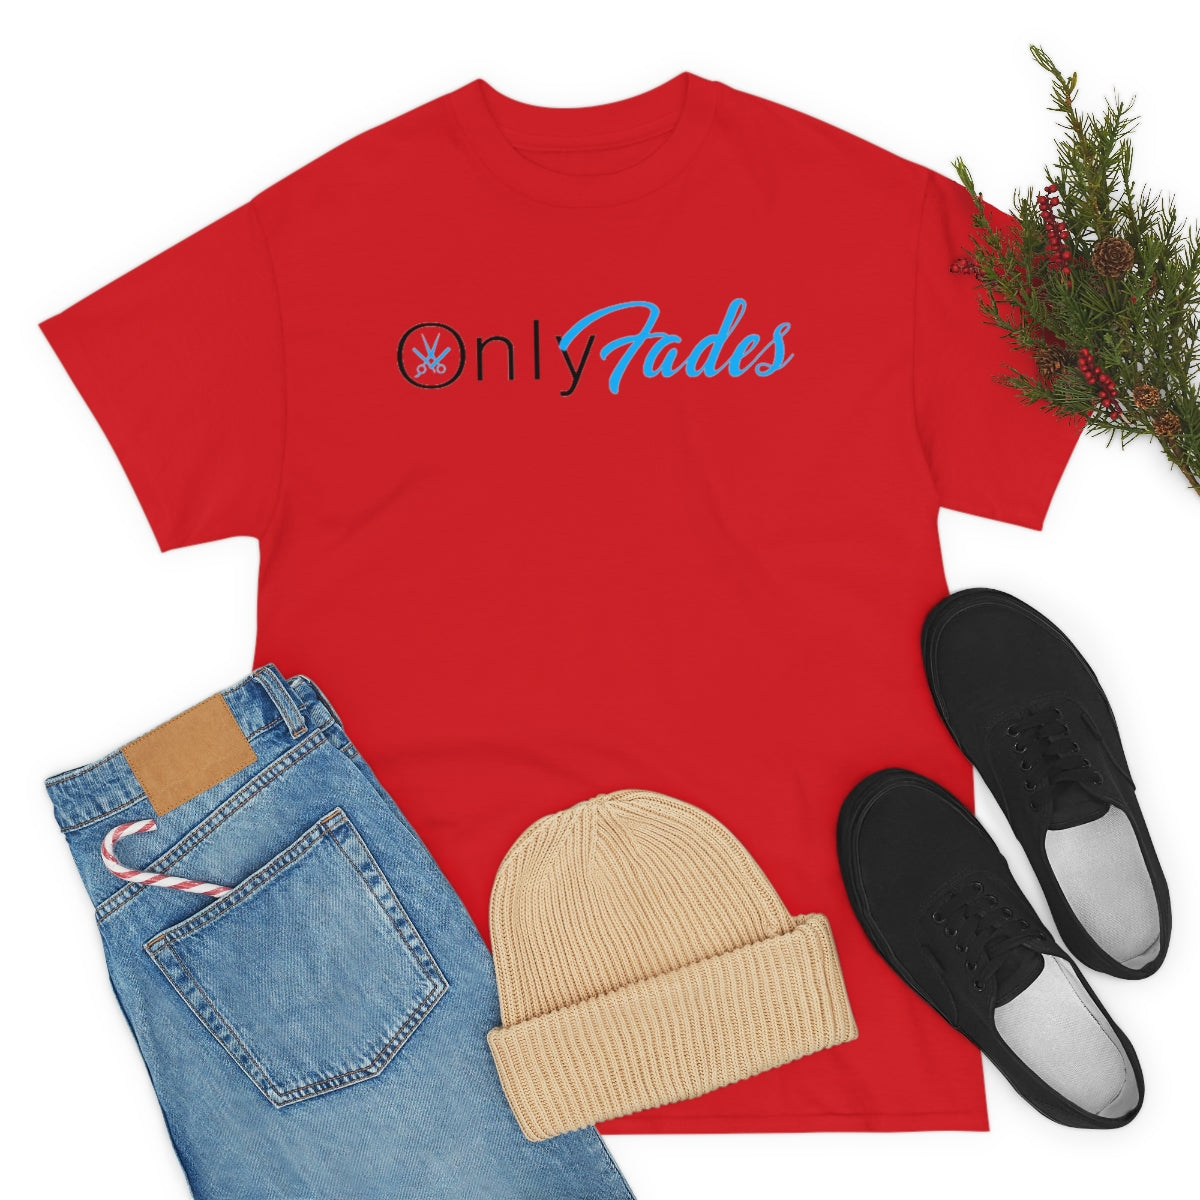 Only Fades Unisex Heavy Cotton Tee